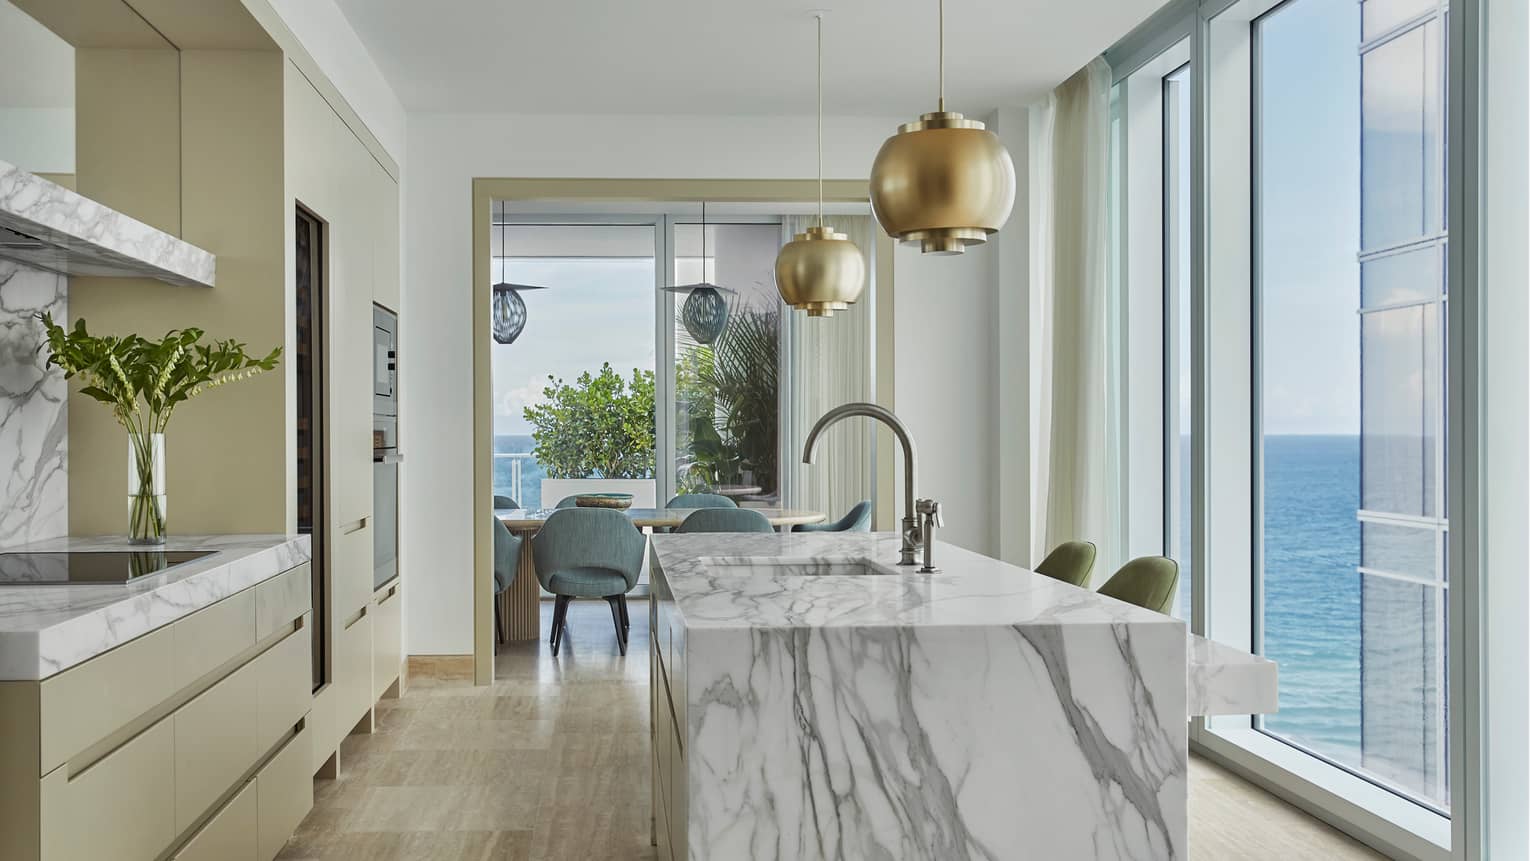 Retro-style brass lamps above grey marble kitchen island, glass wall with ocean views